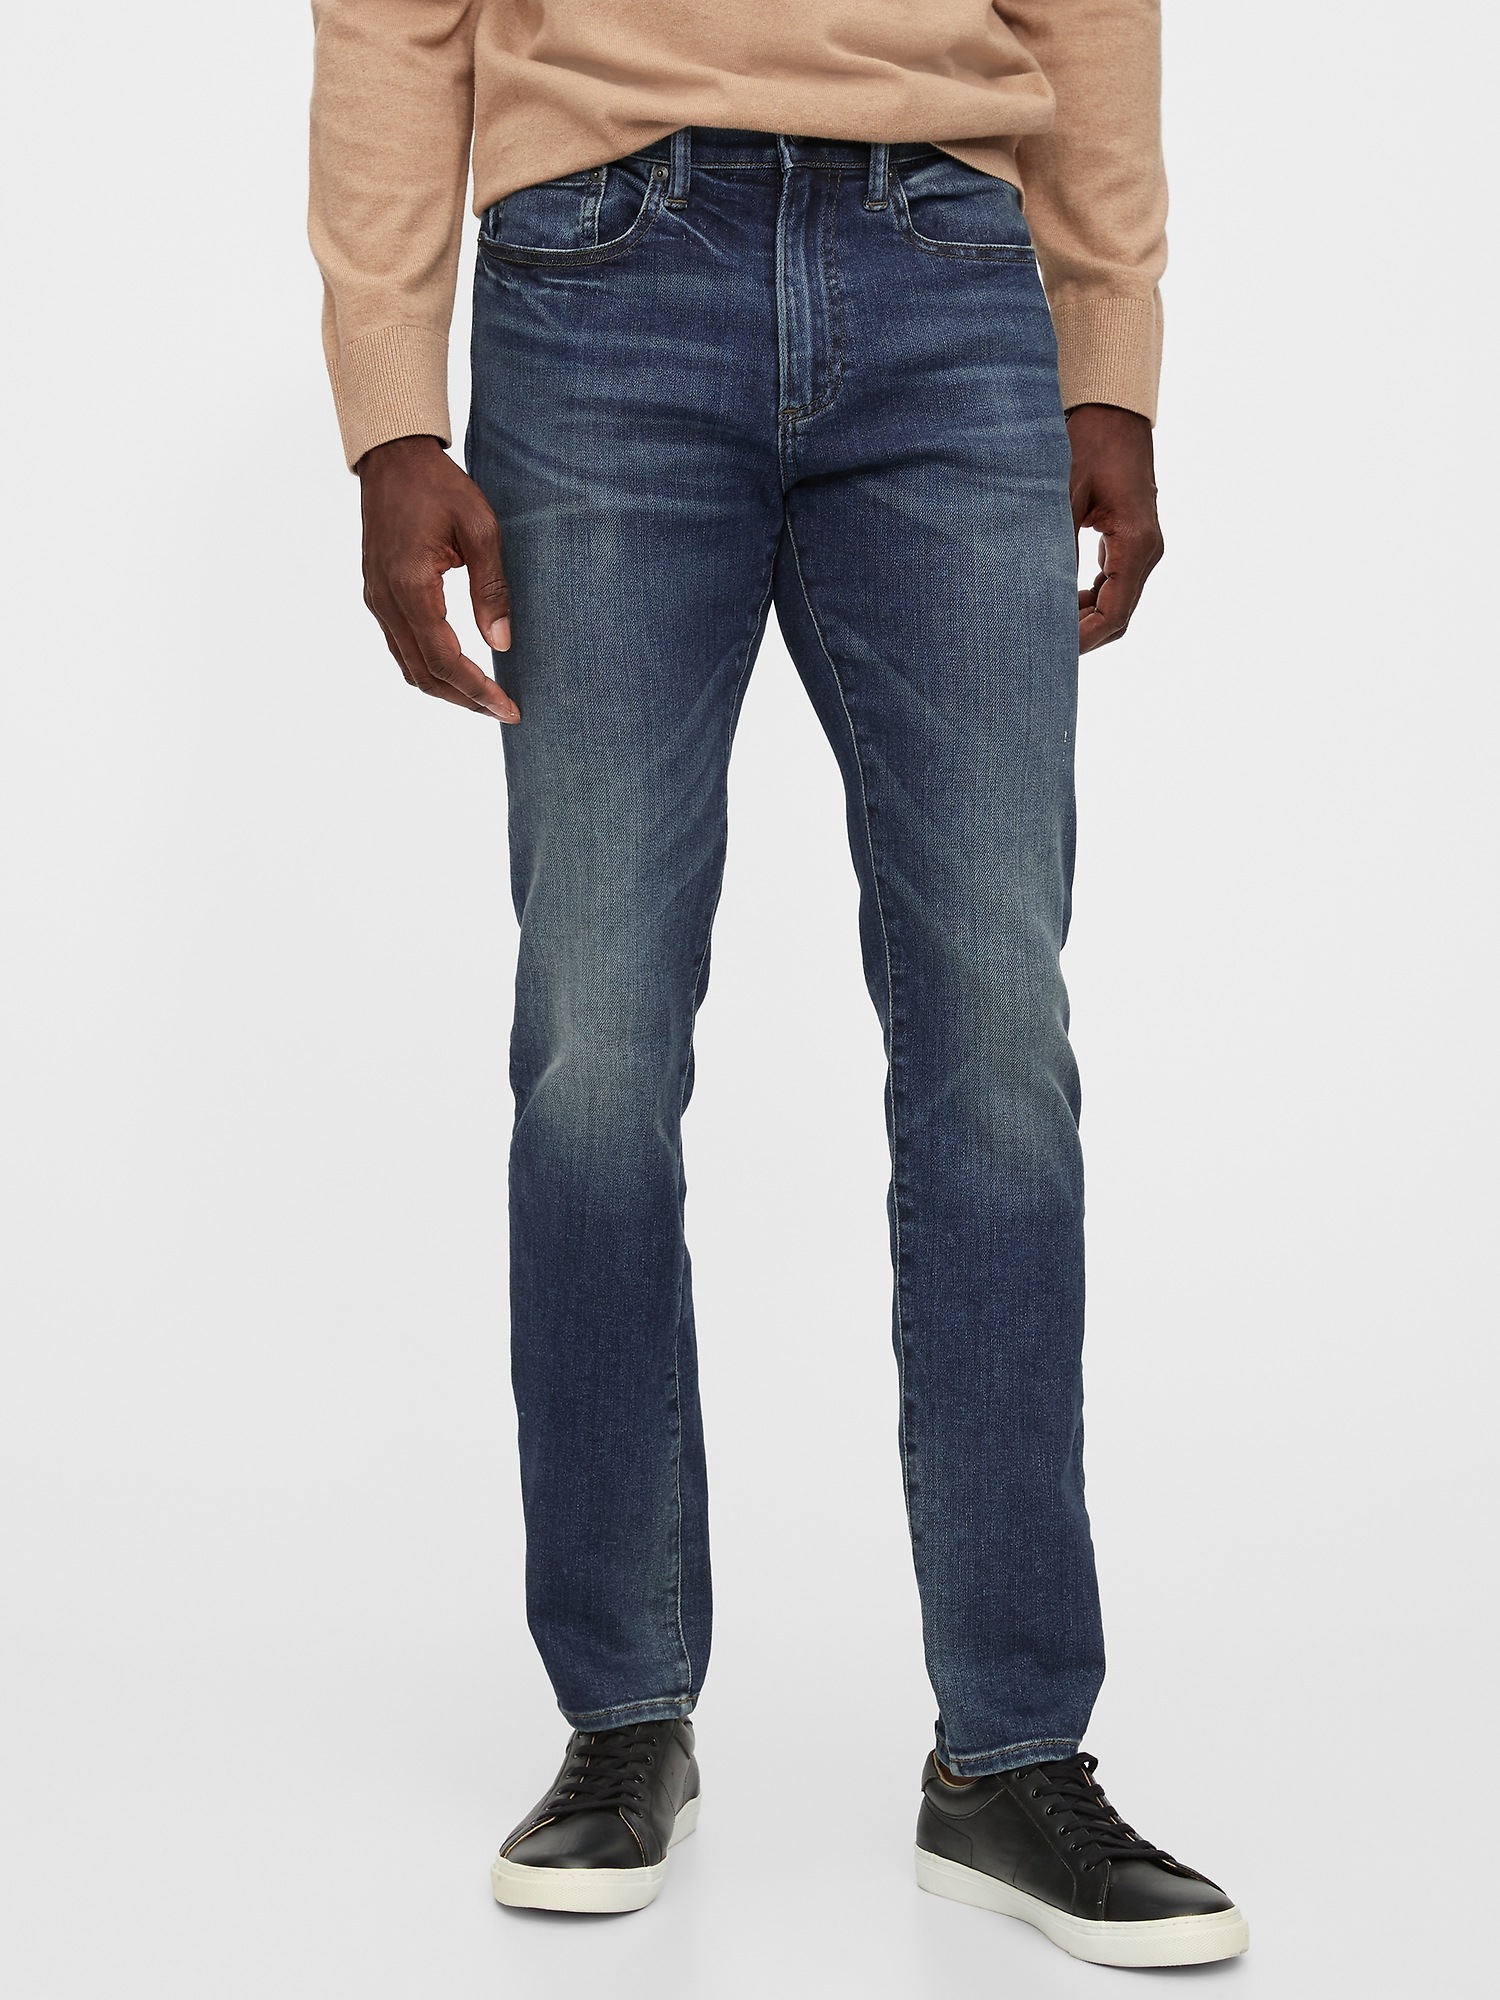 Soft Wear Max Skinny Jeans With Washwell™ | Gap Factory